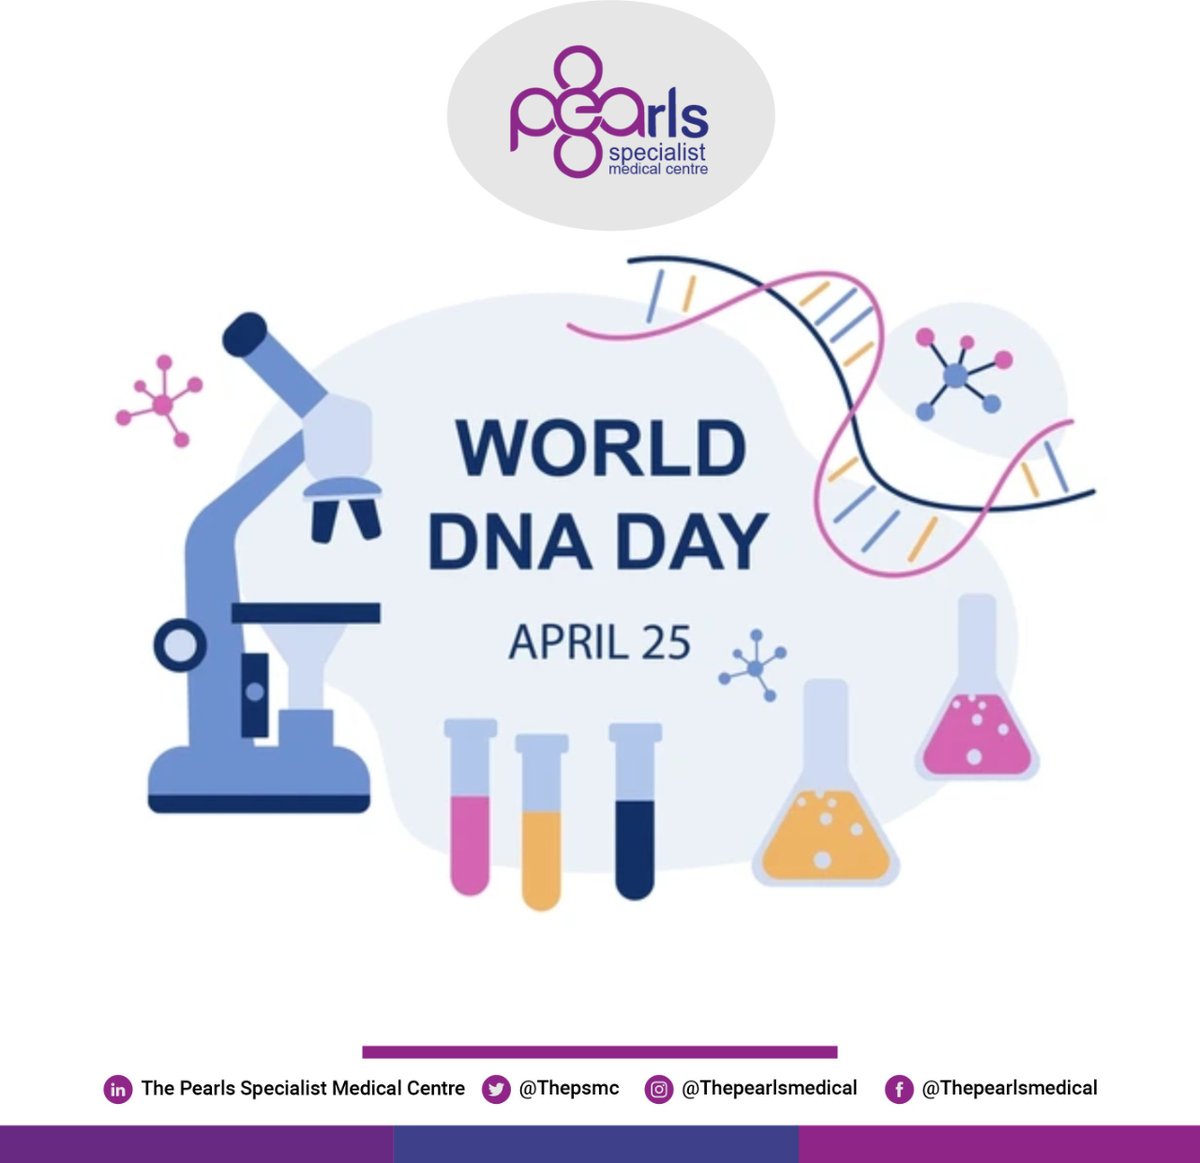 On this special day, let's recognize the significance of DNA in understanding our genetic makeup, unlocking medical breakthroughs, and advancing science and technology.
#WorldDNADay #Genetics #Science #MedicalBreakthroughs #Discoveries #Healthcare #Innovation #Thepsmc